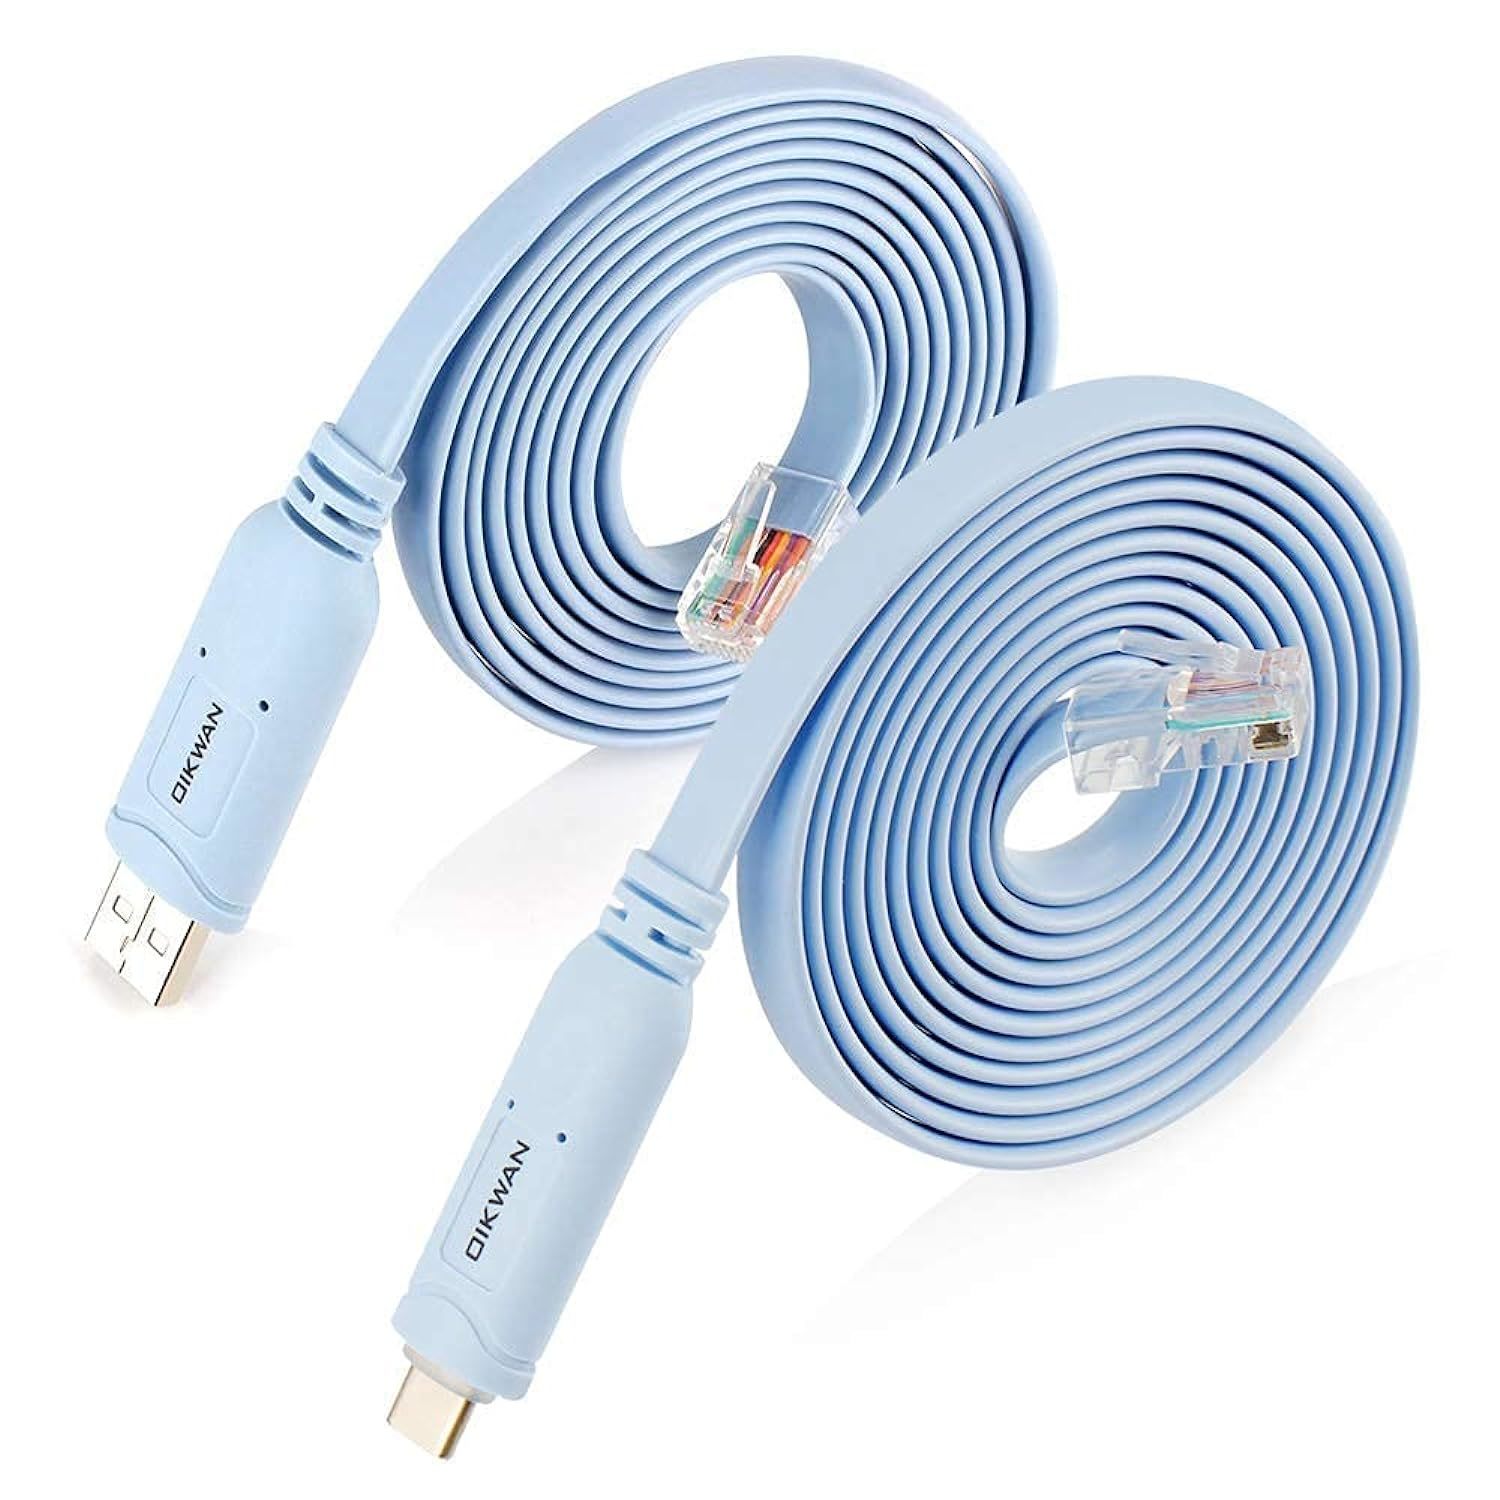 6Ft Usb And Usb C To Rj45 Cisco Console Cable For Cisco, Netgear, Ubiquity, Link - $38.99